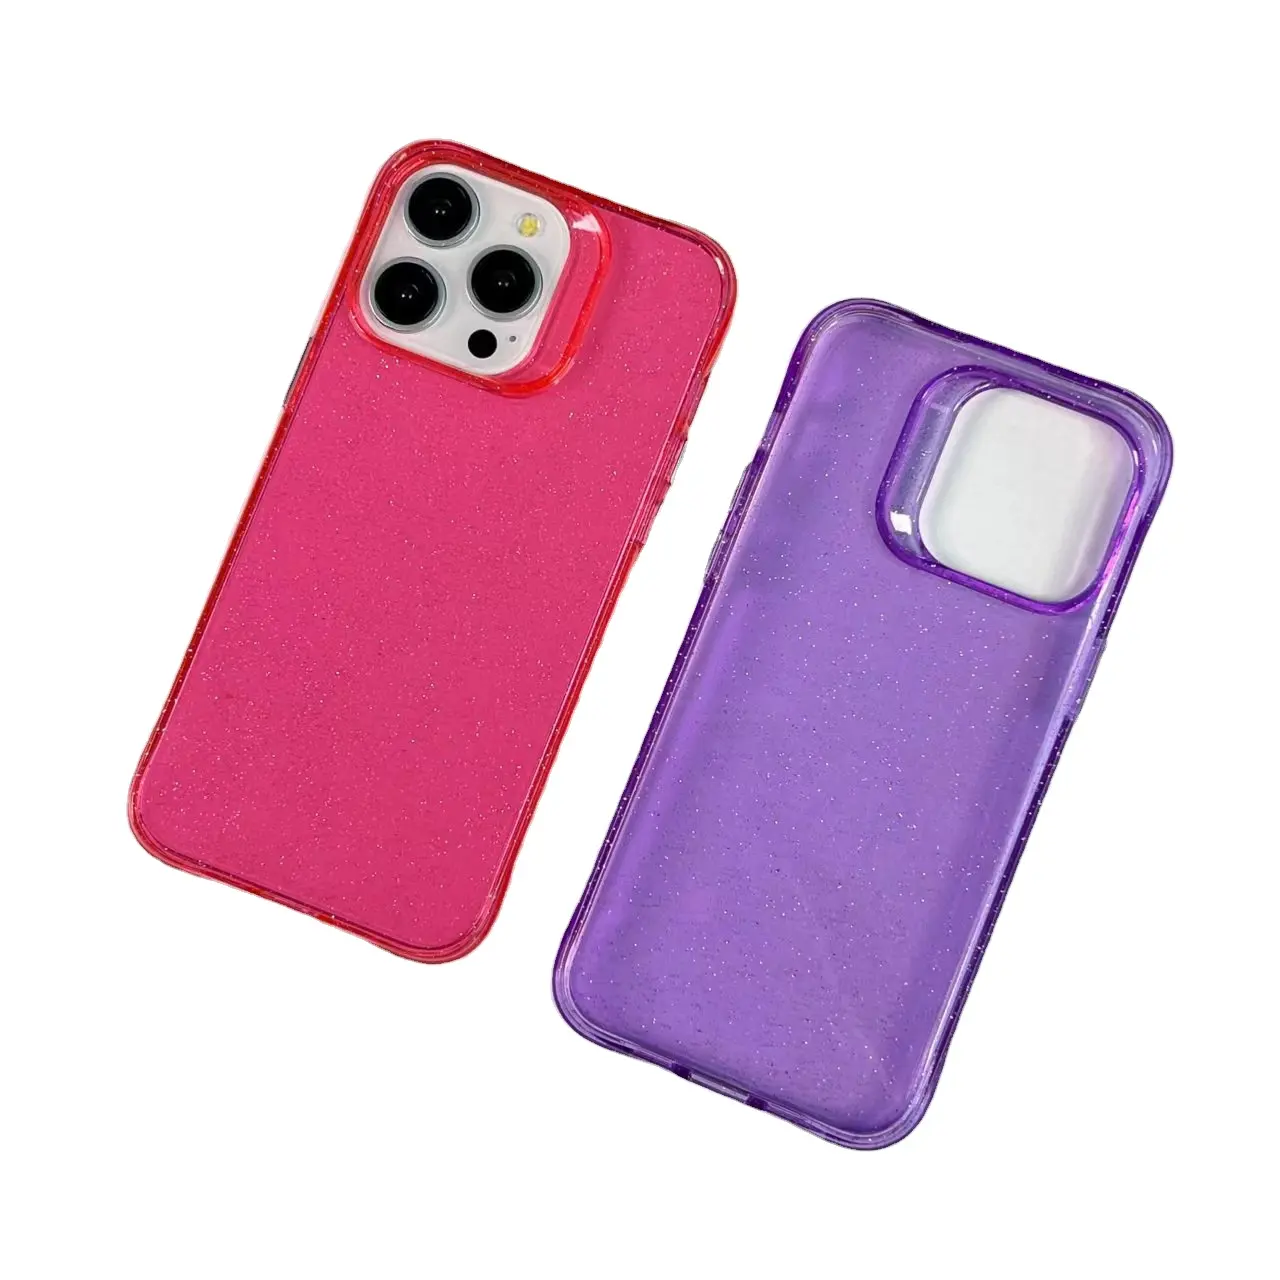 Shanhui flash mobile phone multi color plastic cover making machine case for girl